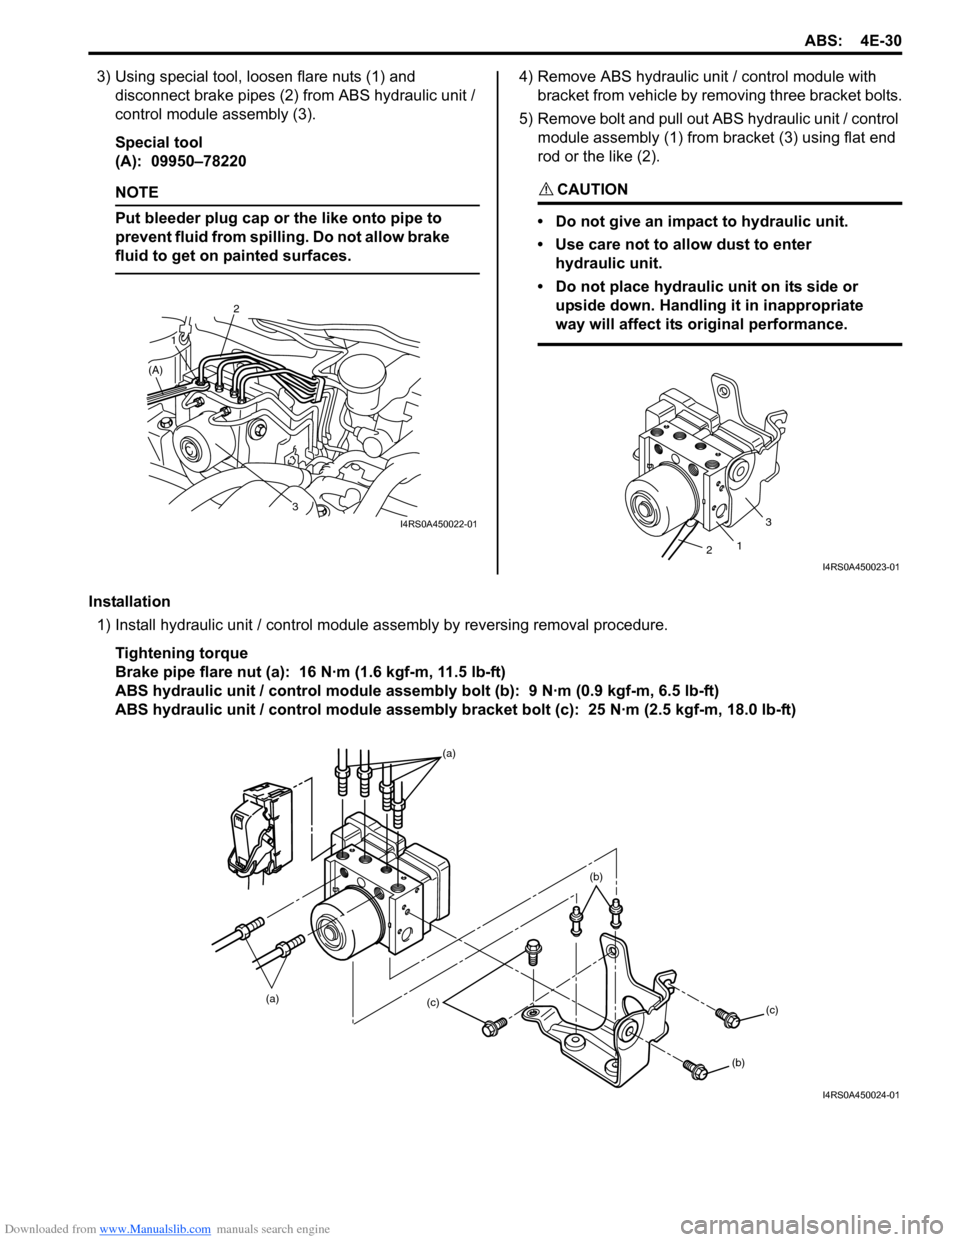 SUZUKI SWIFT 2006 2.G Service Repair Manual Downloaded from www.Manualslib.com manuals search engine ABS: 4E-30
3) Using special tool, loosen flare nuts (1) and disconnect brake pipes (2) from ABS hydraulic unit / 
control module assembly (3).
